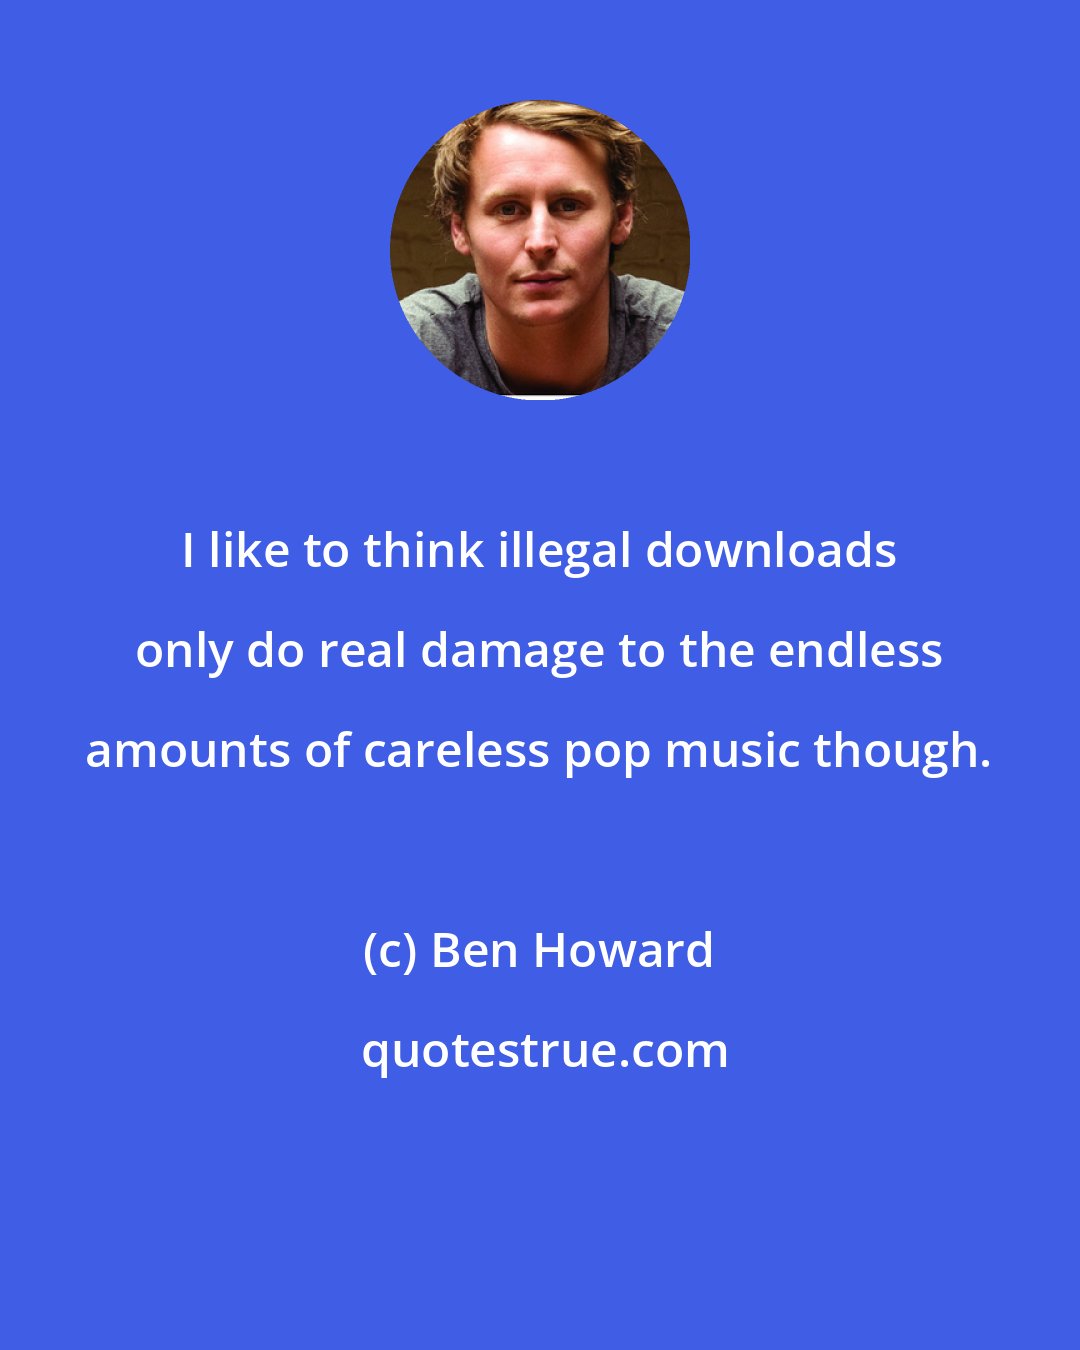 Ben Howard: I like to think illegal downloads only do real damage to the endless amounts of careless pop music though.